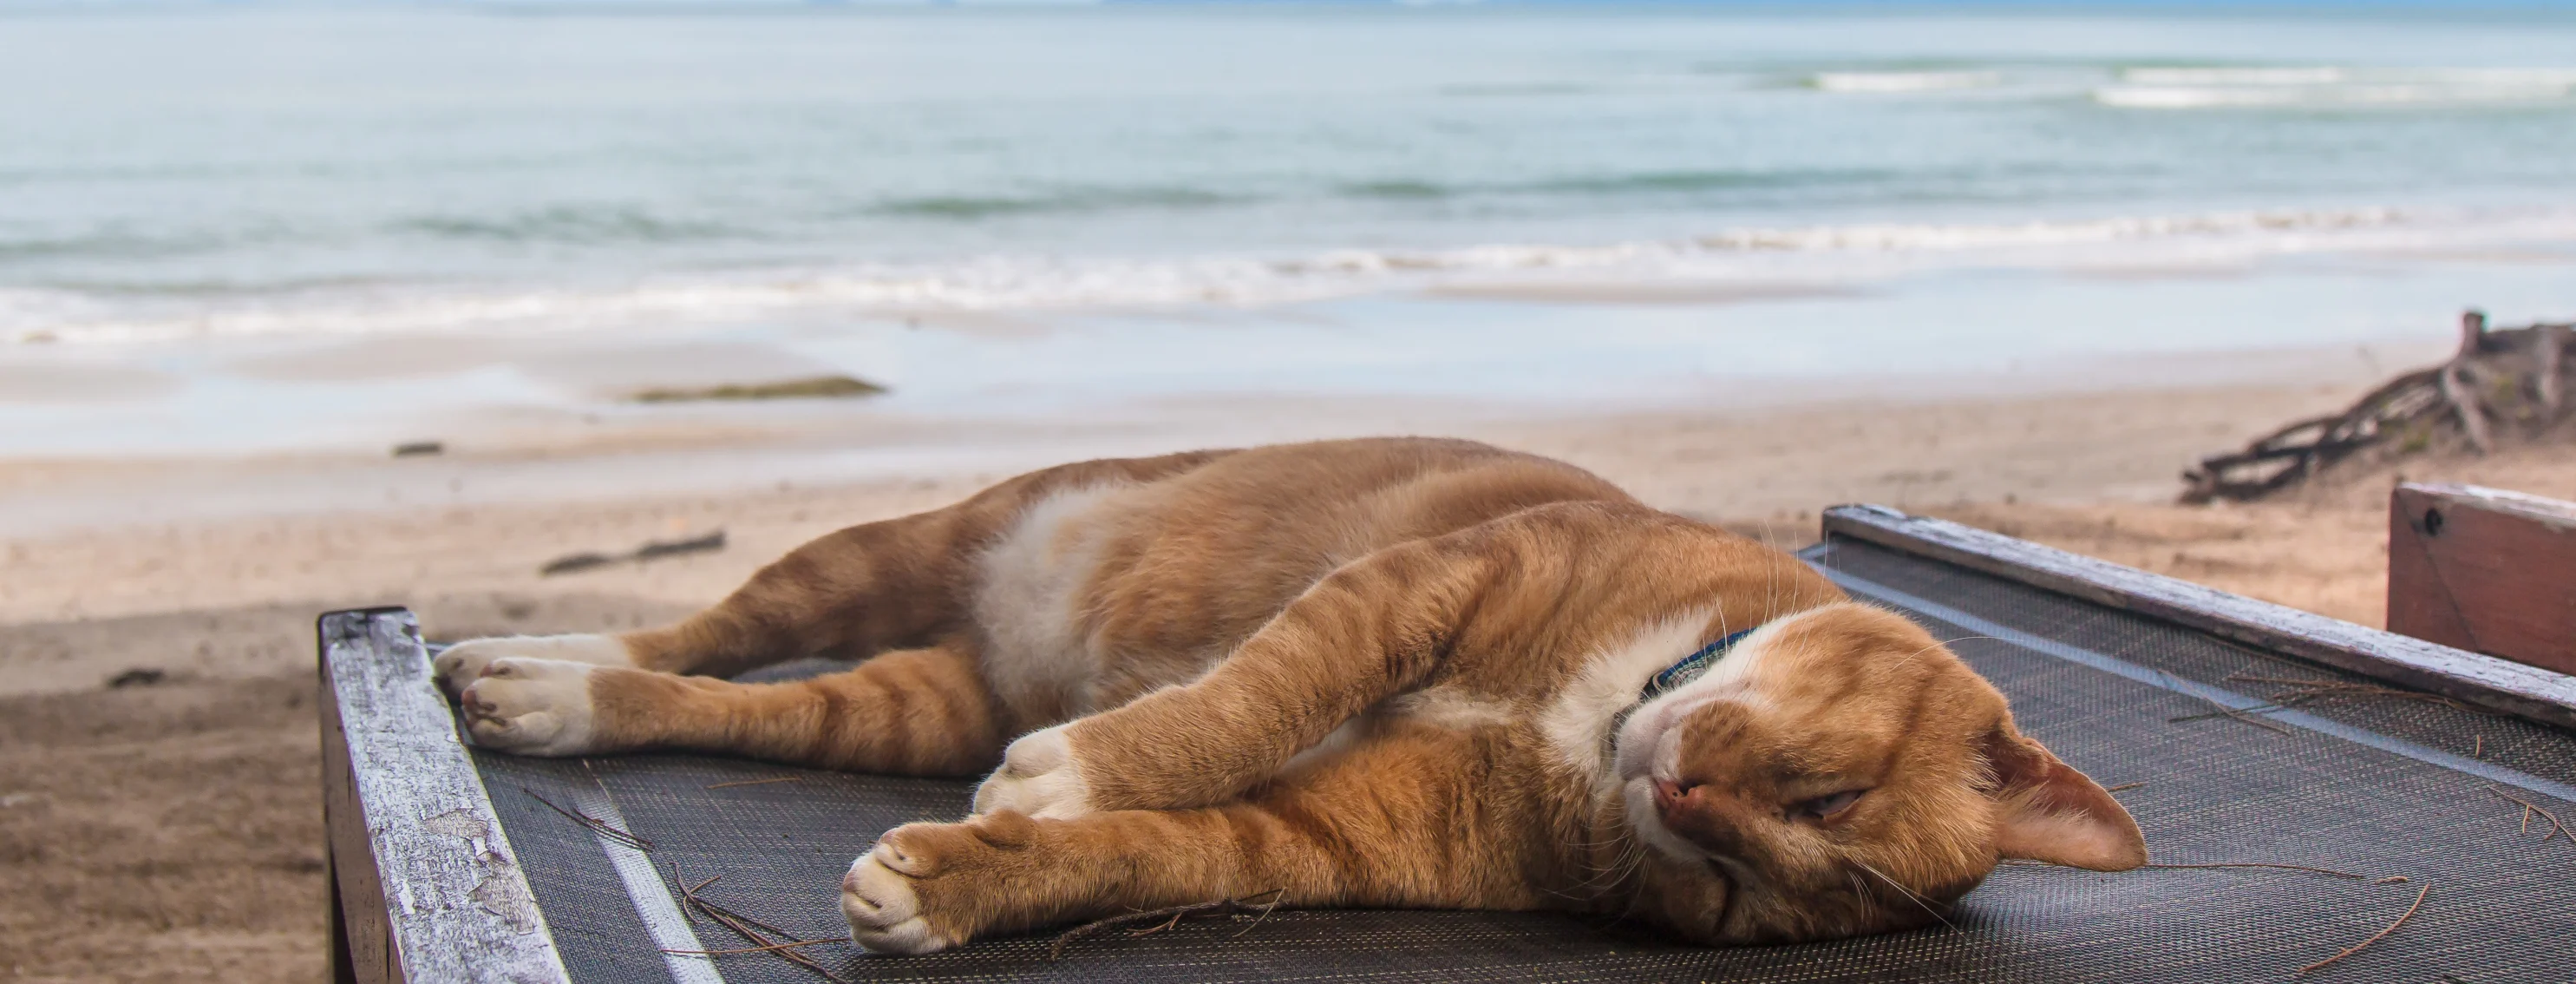 cat sleeping on chair by the beach